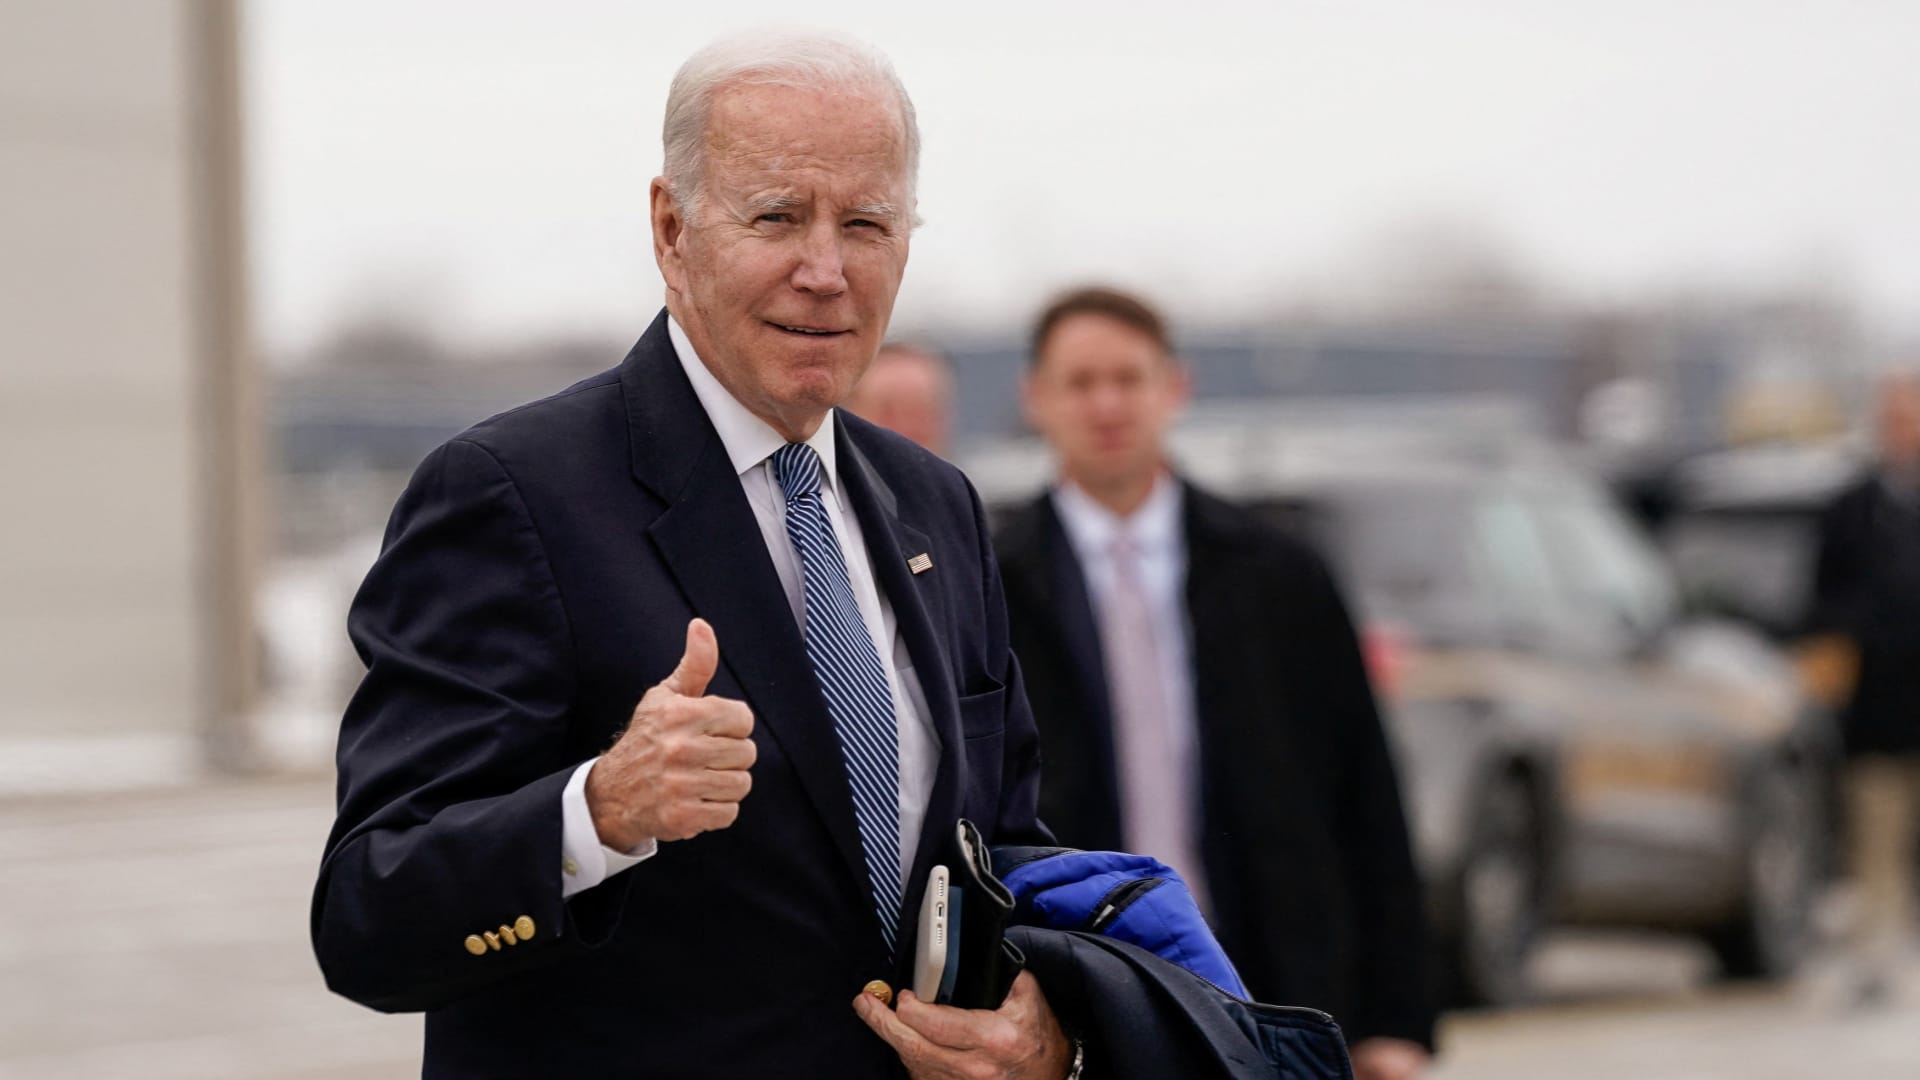 U.S. President Joe Biden gestures to reporters before boarding Air Force One en route to Camp David at Hancock Field Air National Guard Base in Syracuse, New York, U.S., February 4, 2023. 